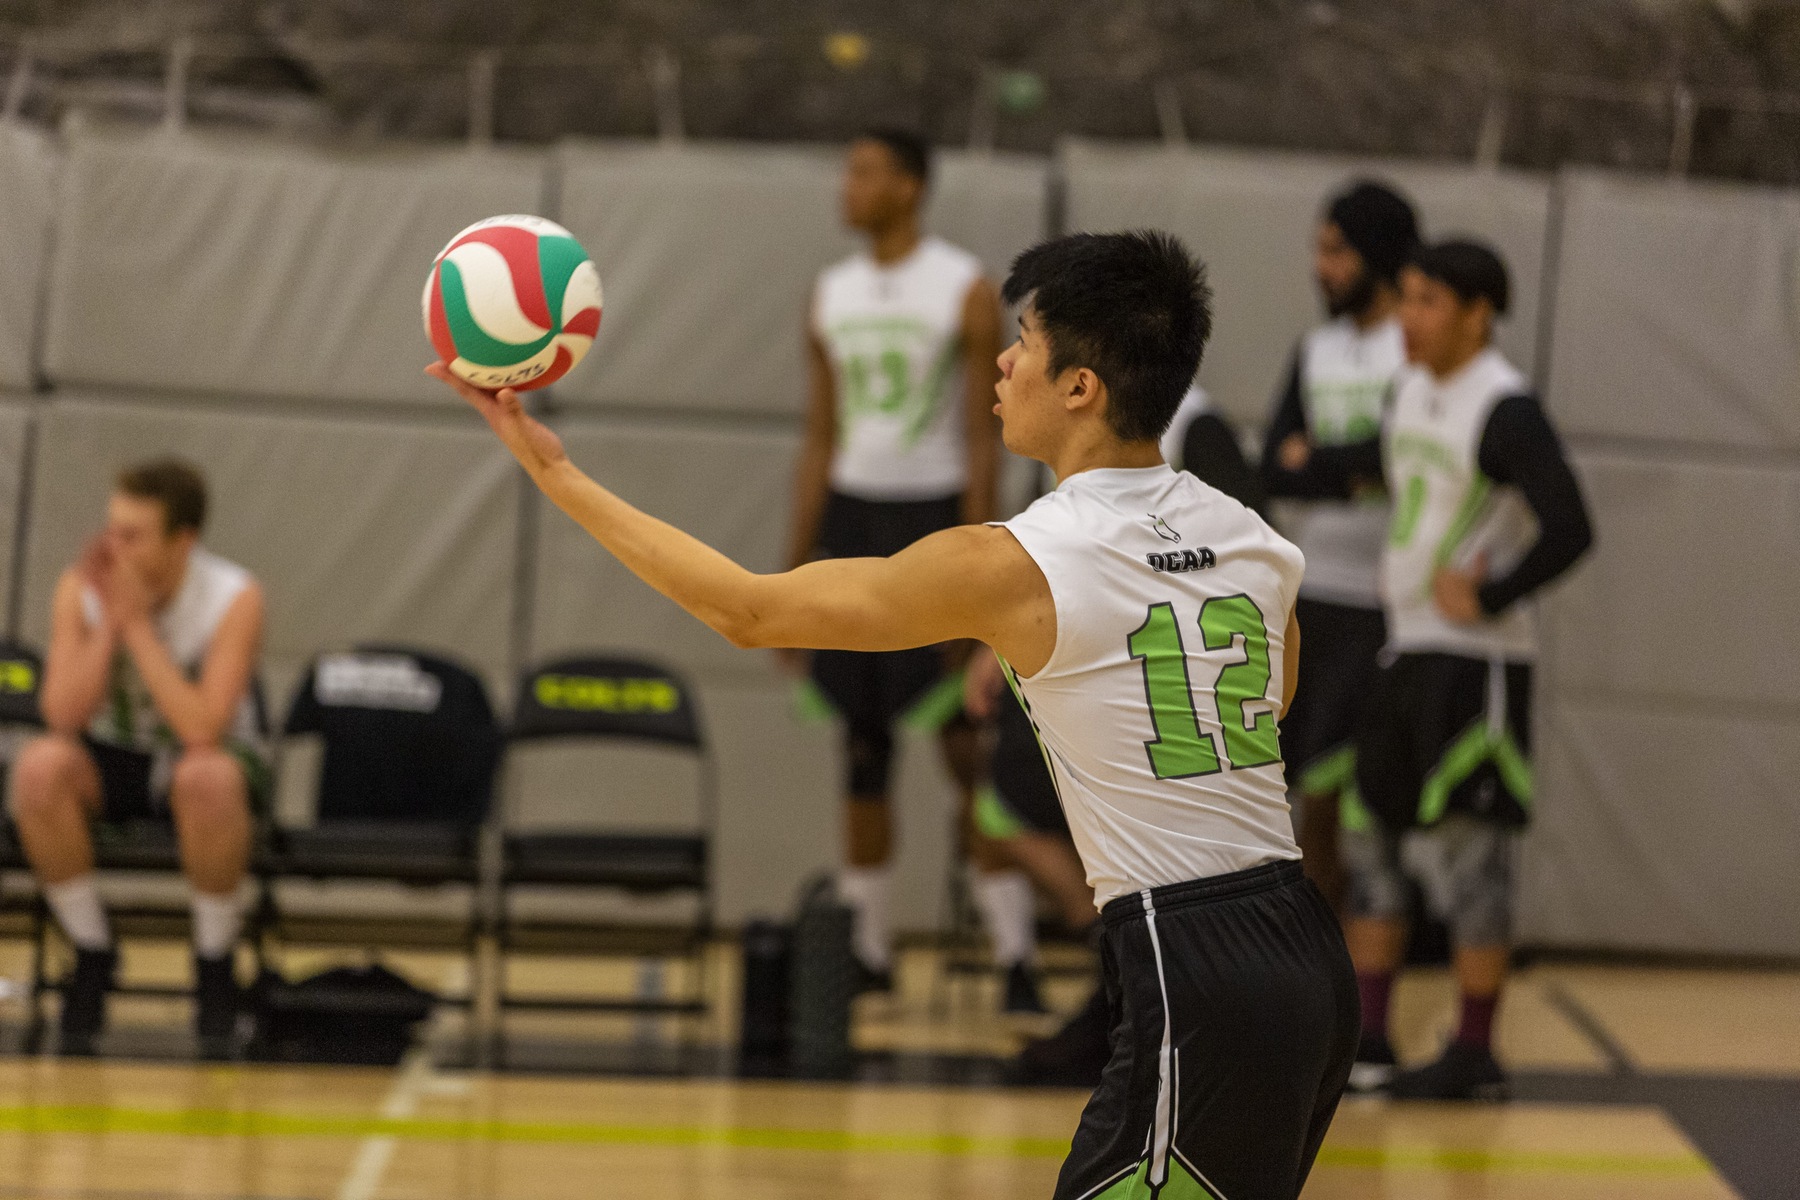 Timothy Ho of the Centennial Colts gets ready to serve during game action at the Athletic and Wellness Centre between the Colts and the Canadore Panthers. (John Theurer/Colts Media)